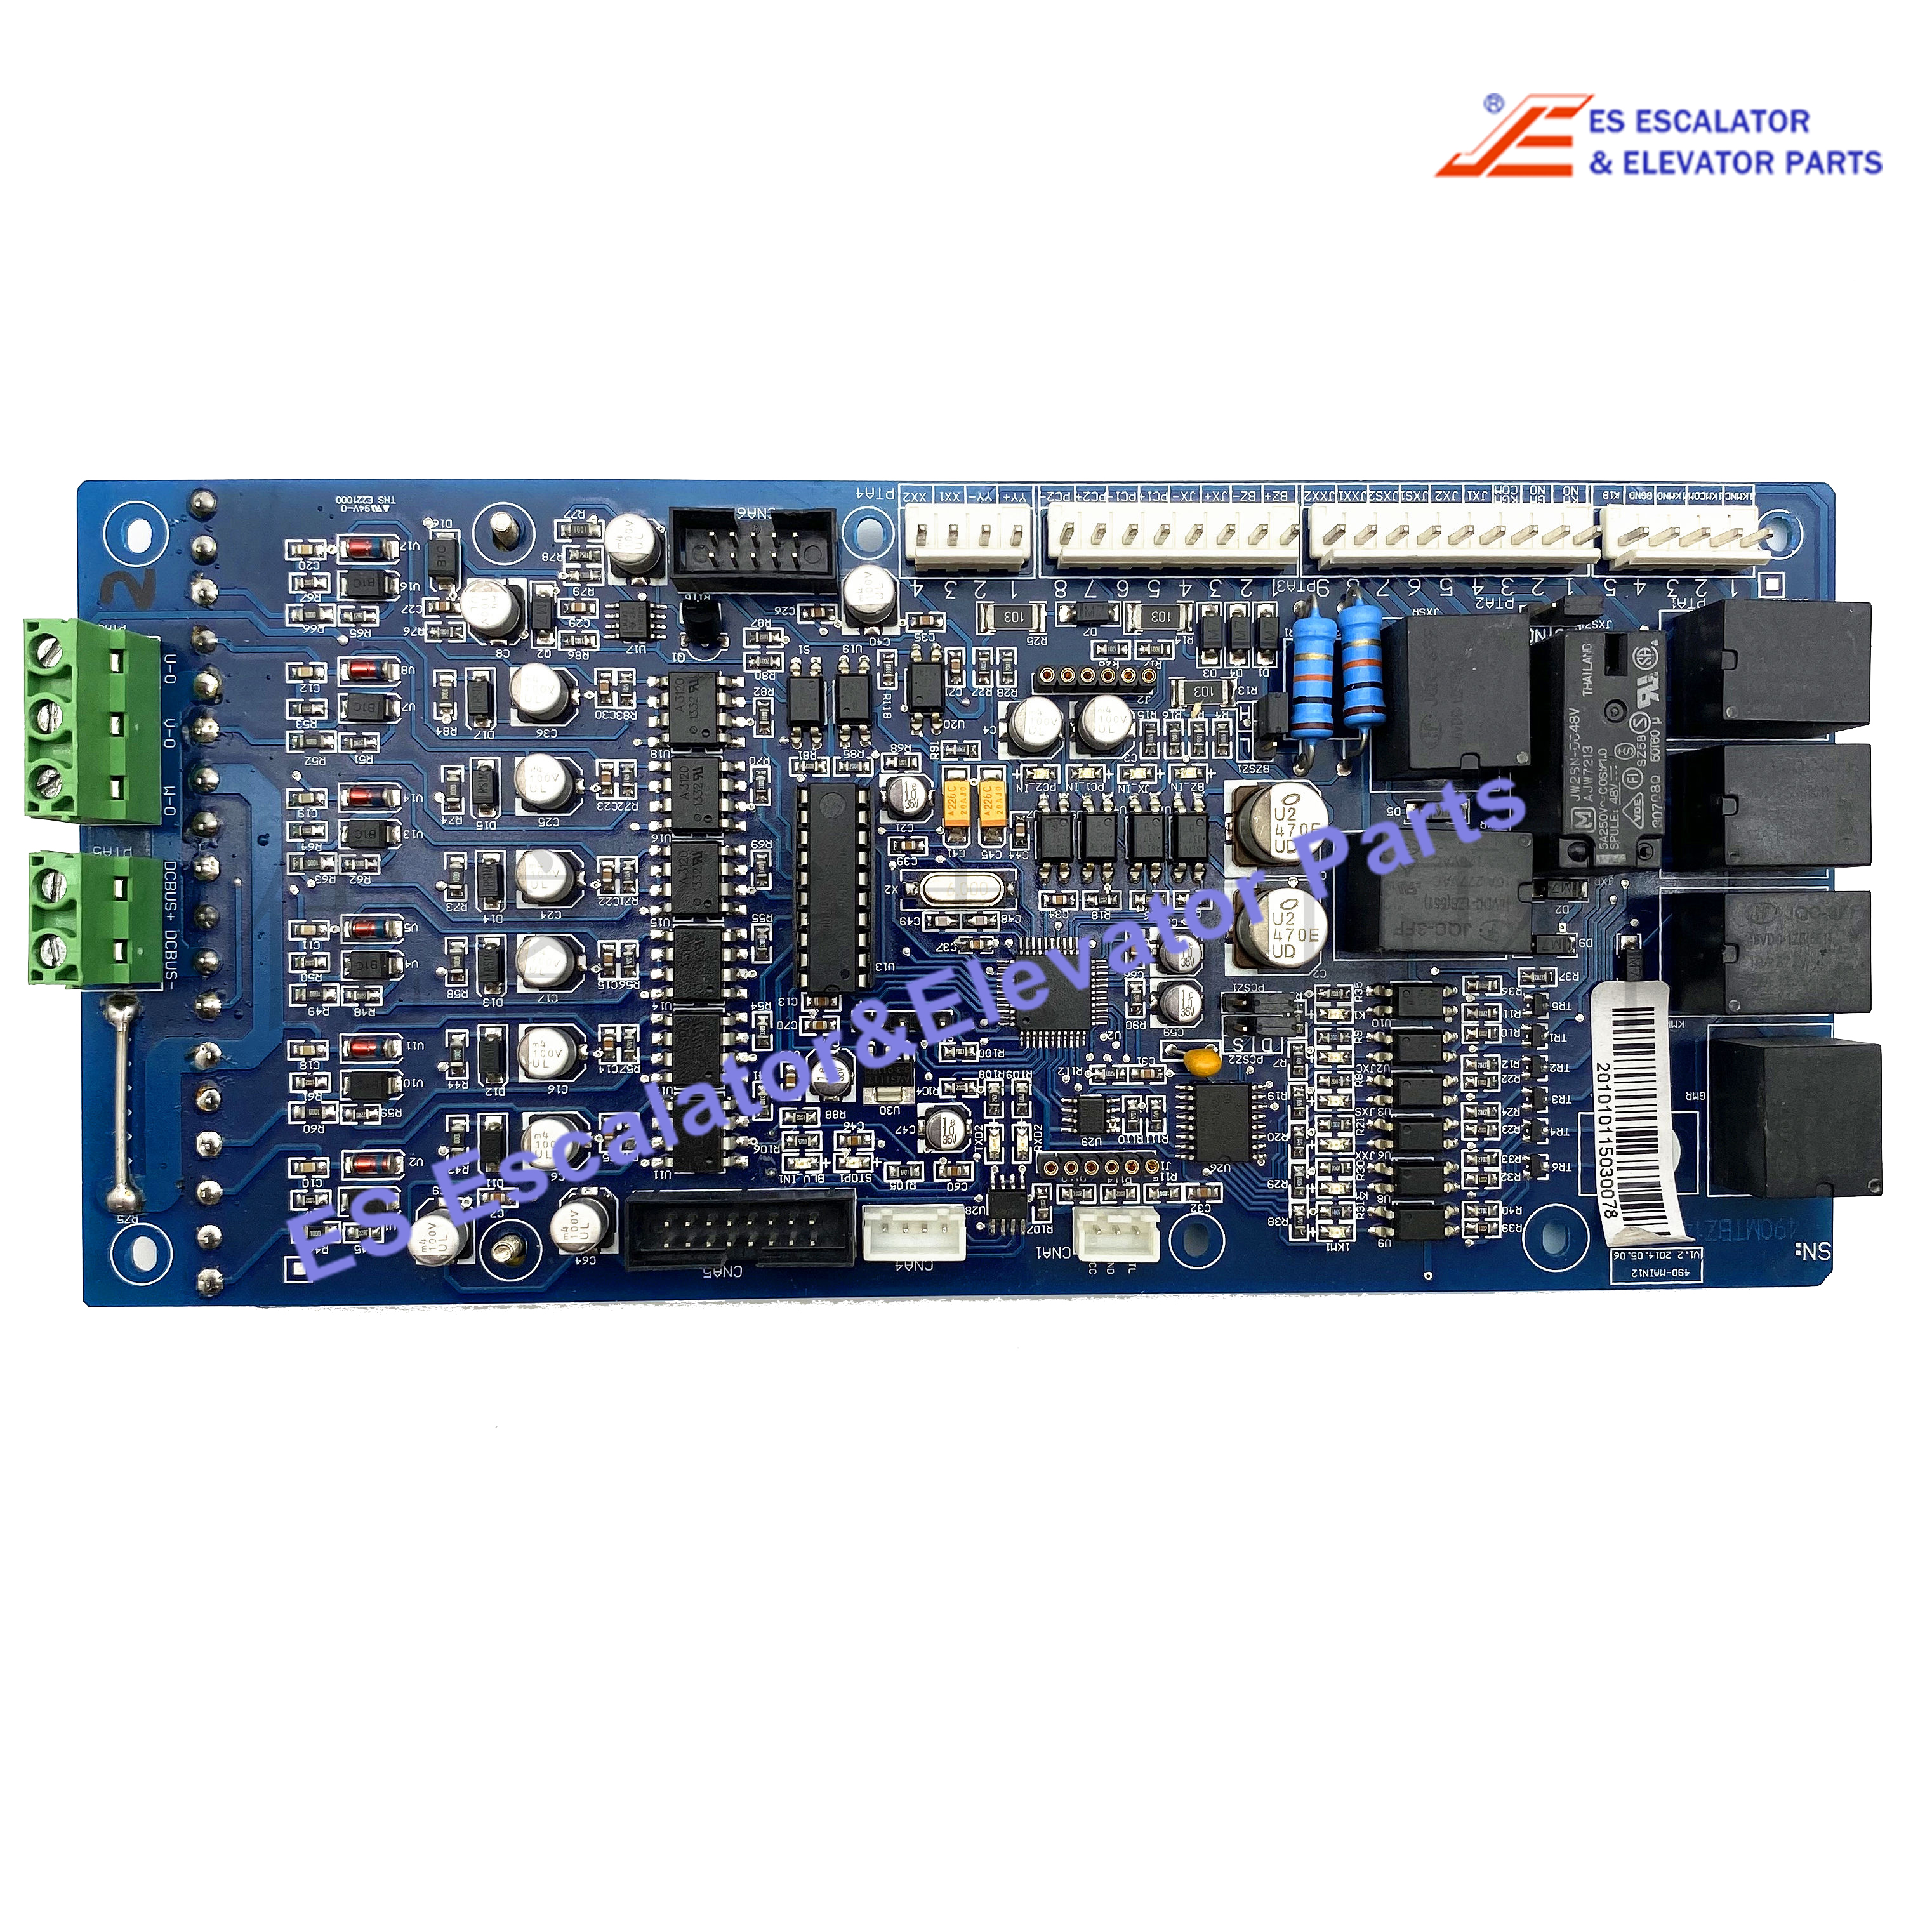 490-MAIN12 Elevator PC ARD Main Board Emergency Leveling Device Motherboard Use For Lg/Sigma